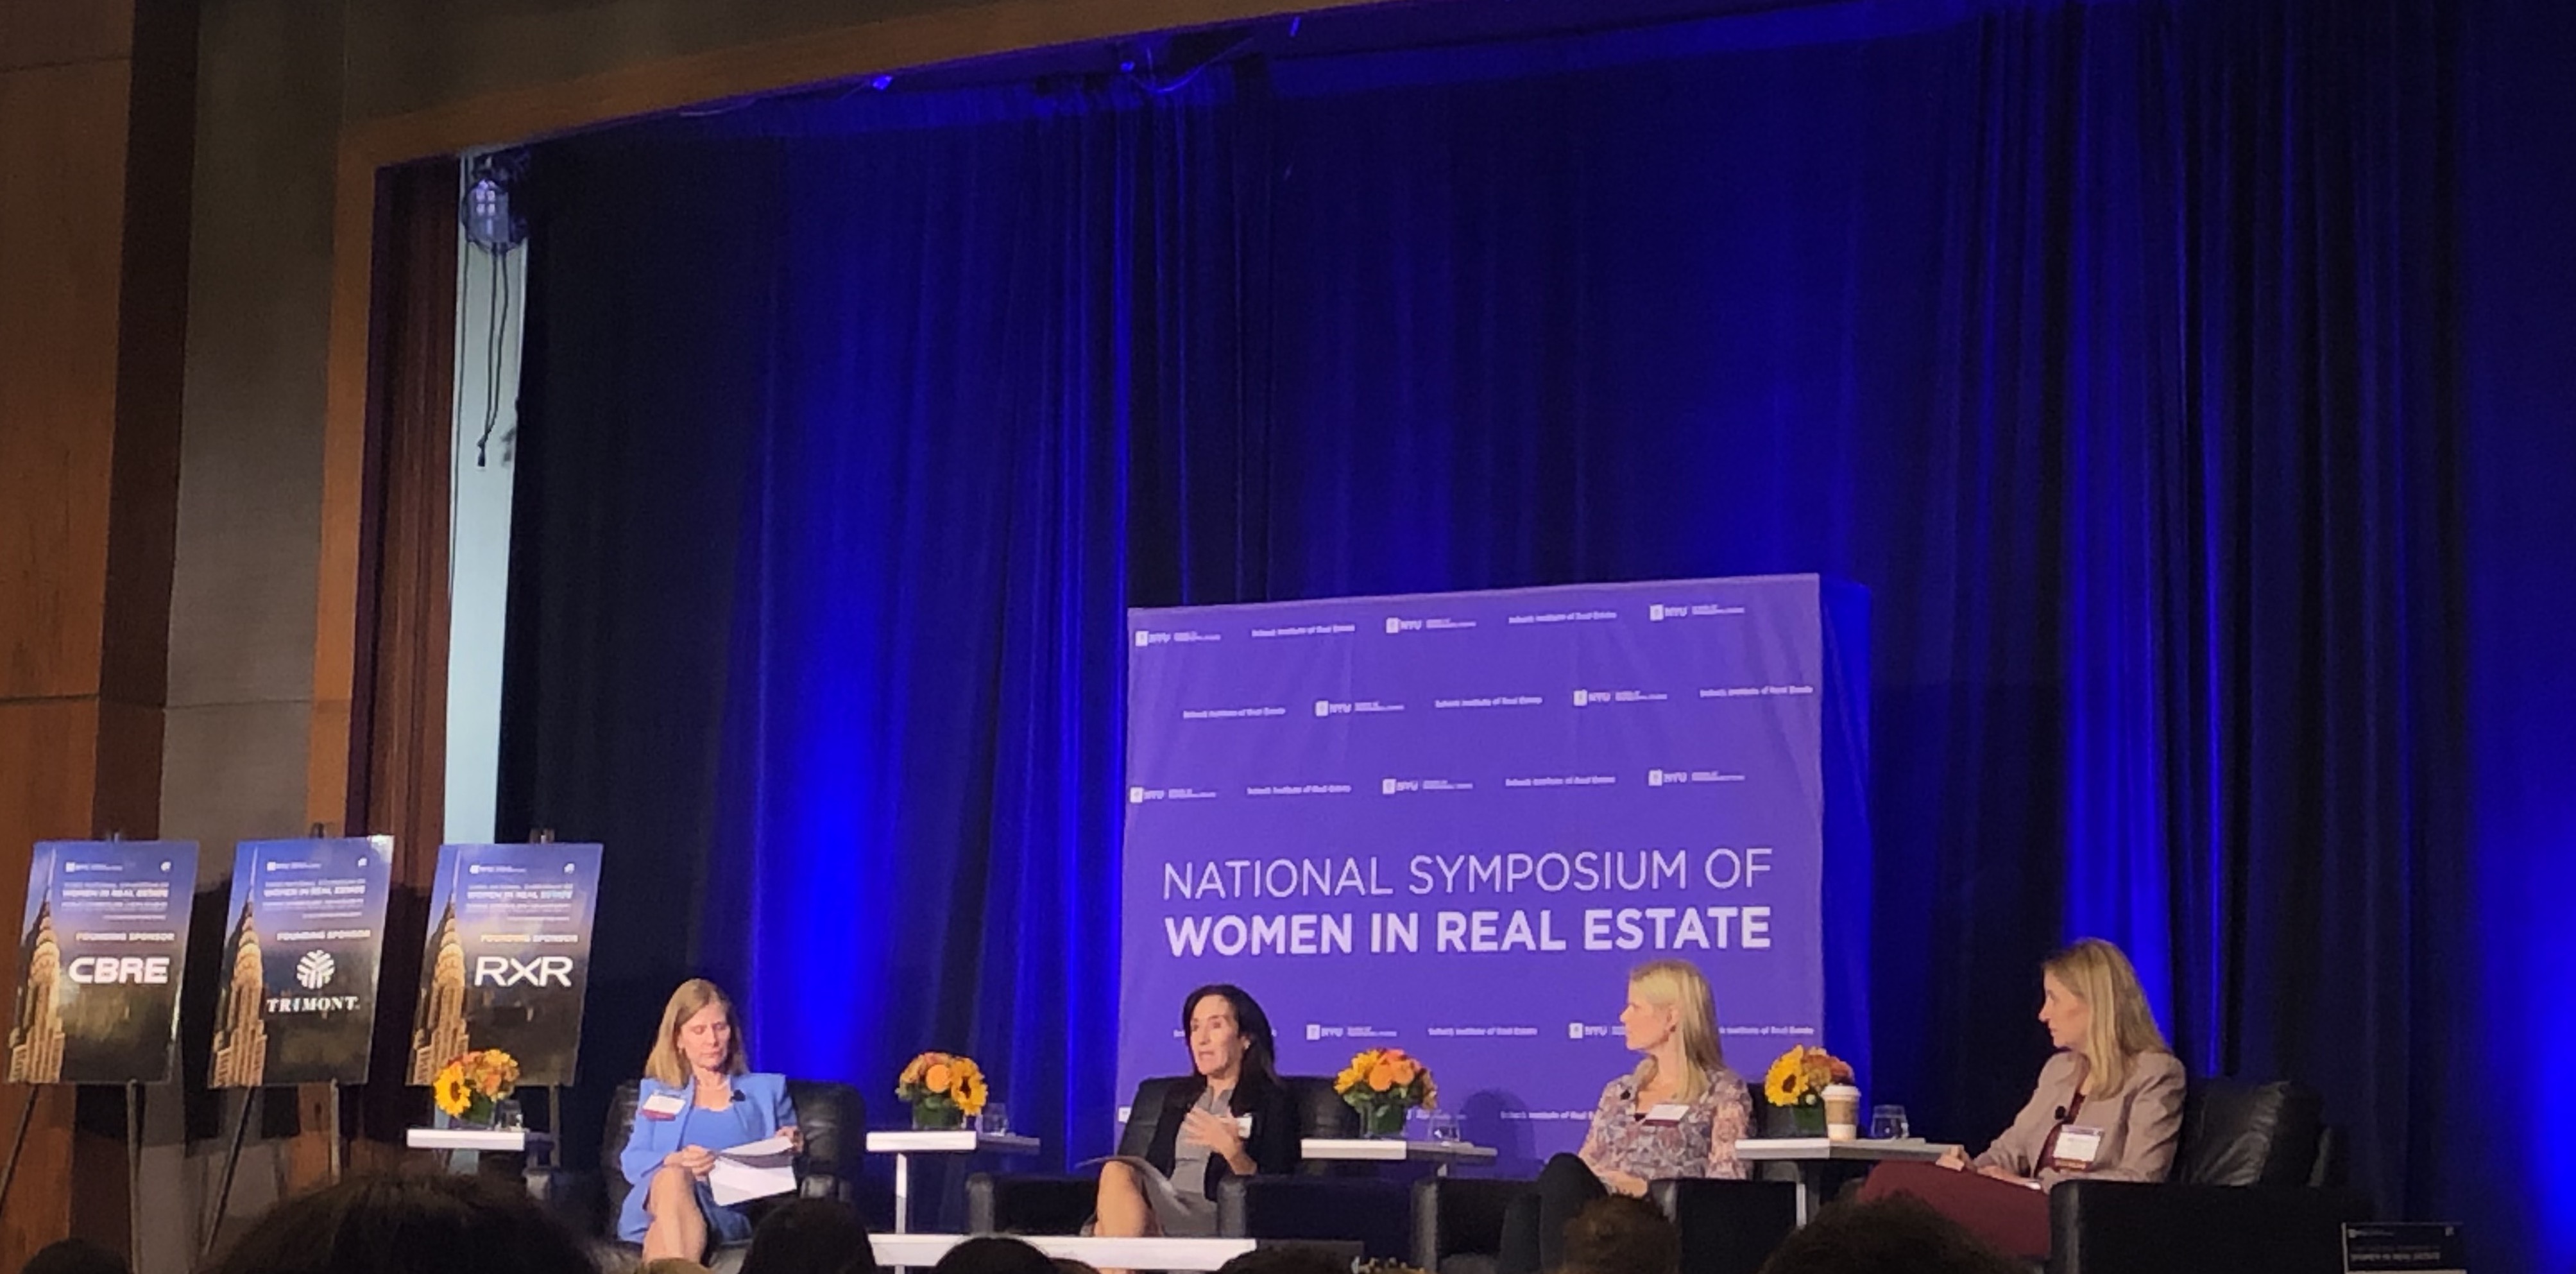 Panelists at the NYU School of Professional Studies Third National Symposium of Women in Real Estate in Manhattan discussing trending topics in real estate